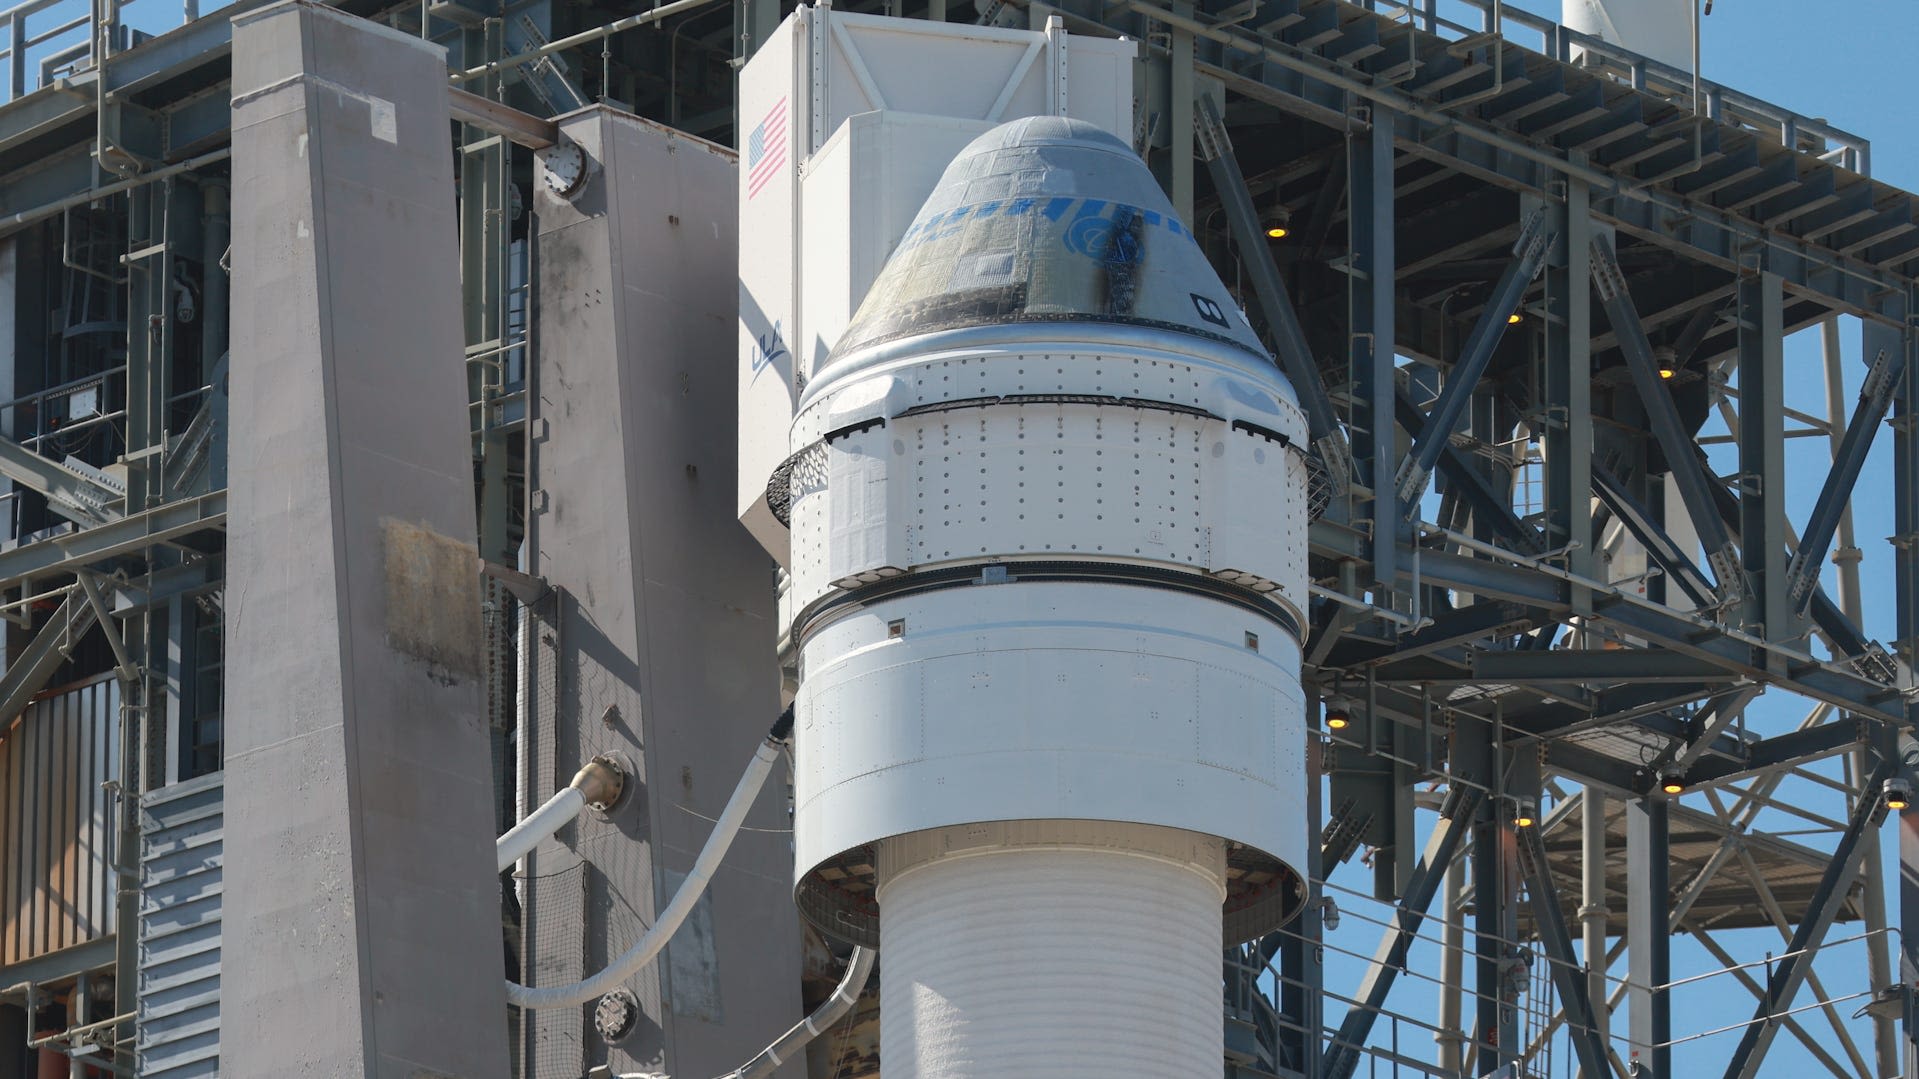 Watch Boeing launch live: After delays, Starliner scheduled to take NASA astronauts to ISS